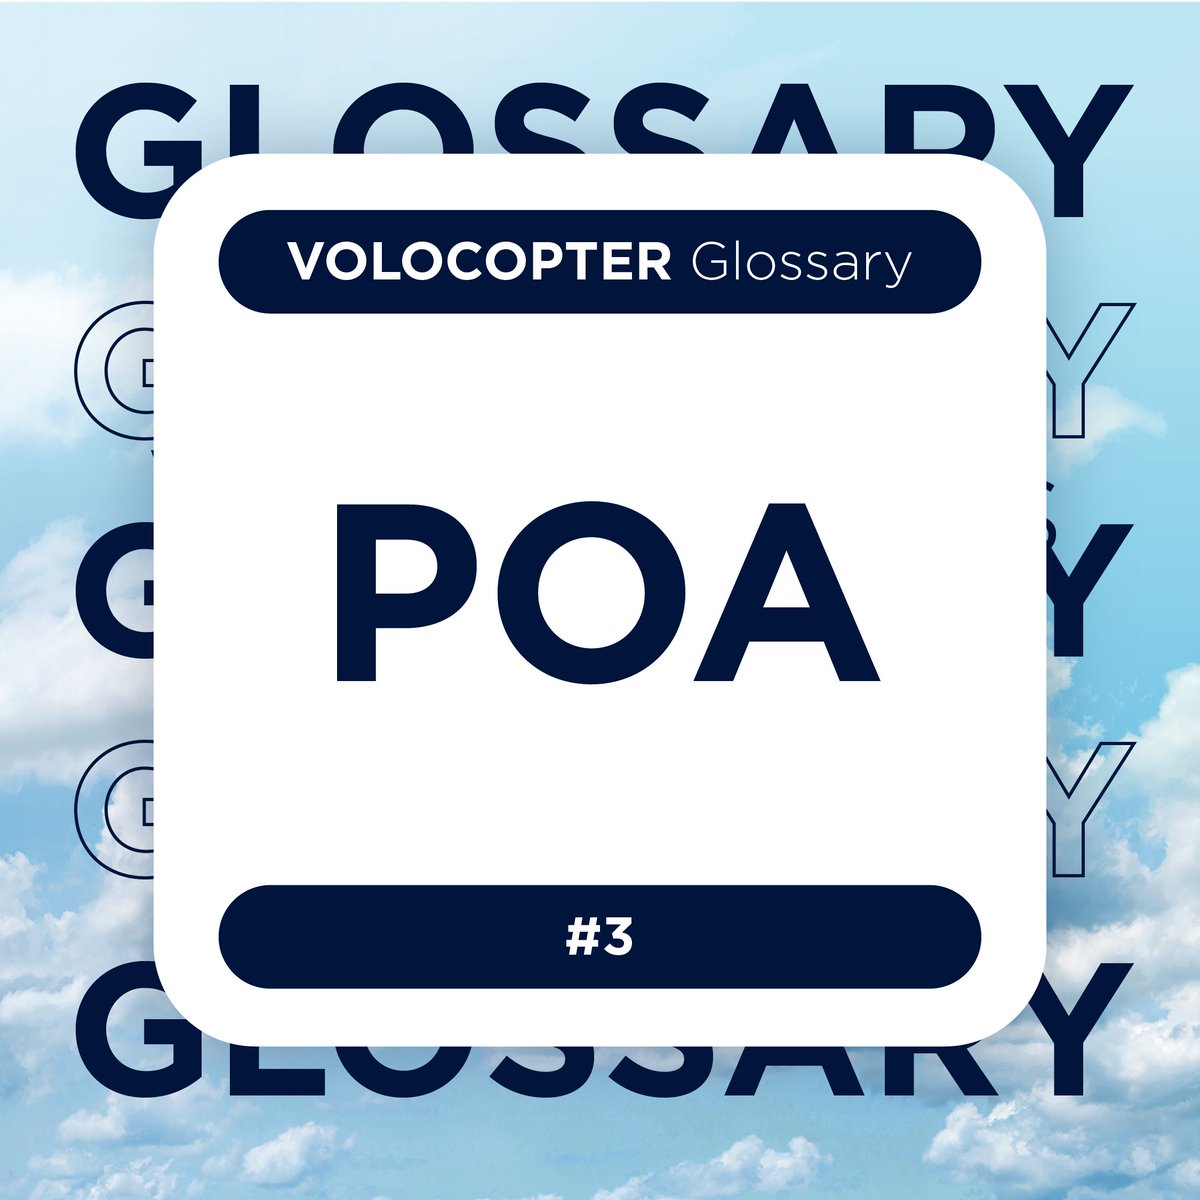 #VolocopterGlossary explains the meaning behind the POA, first achieved in 2019 by Volocopter, and a key reason behind the brands “Made in Germany” identity